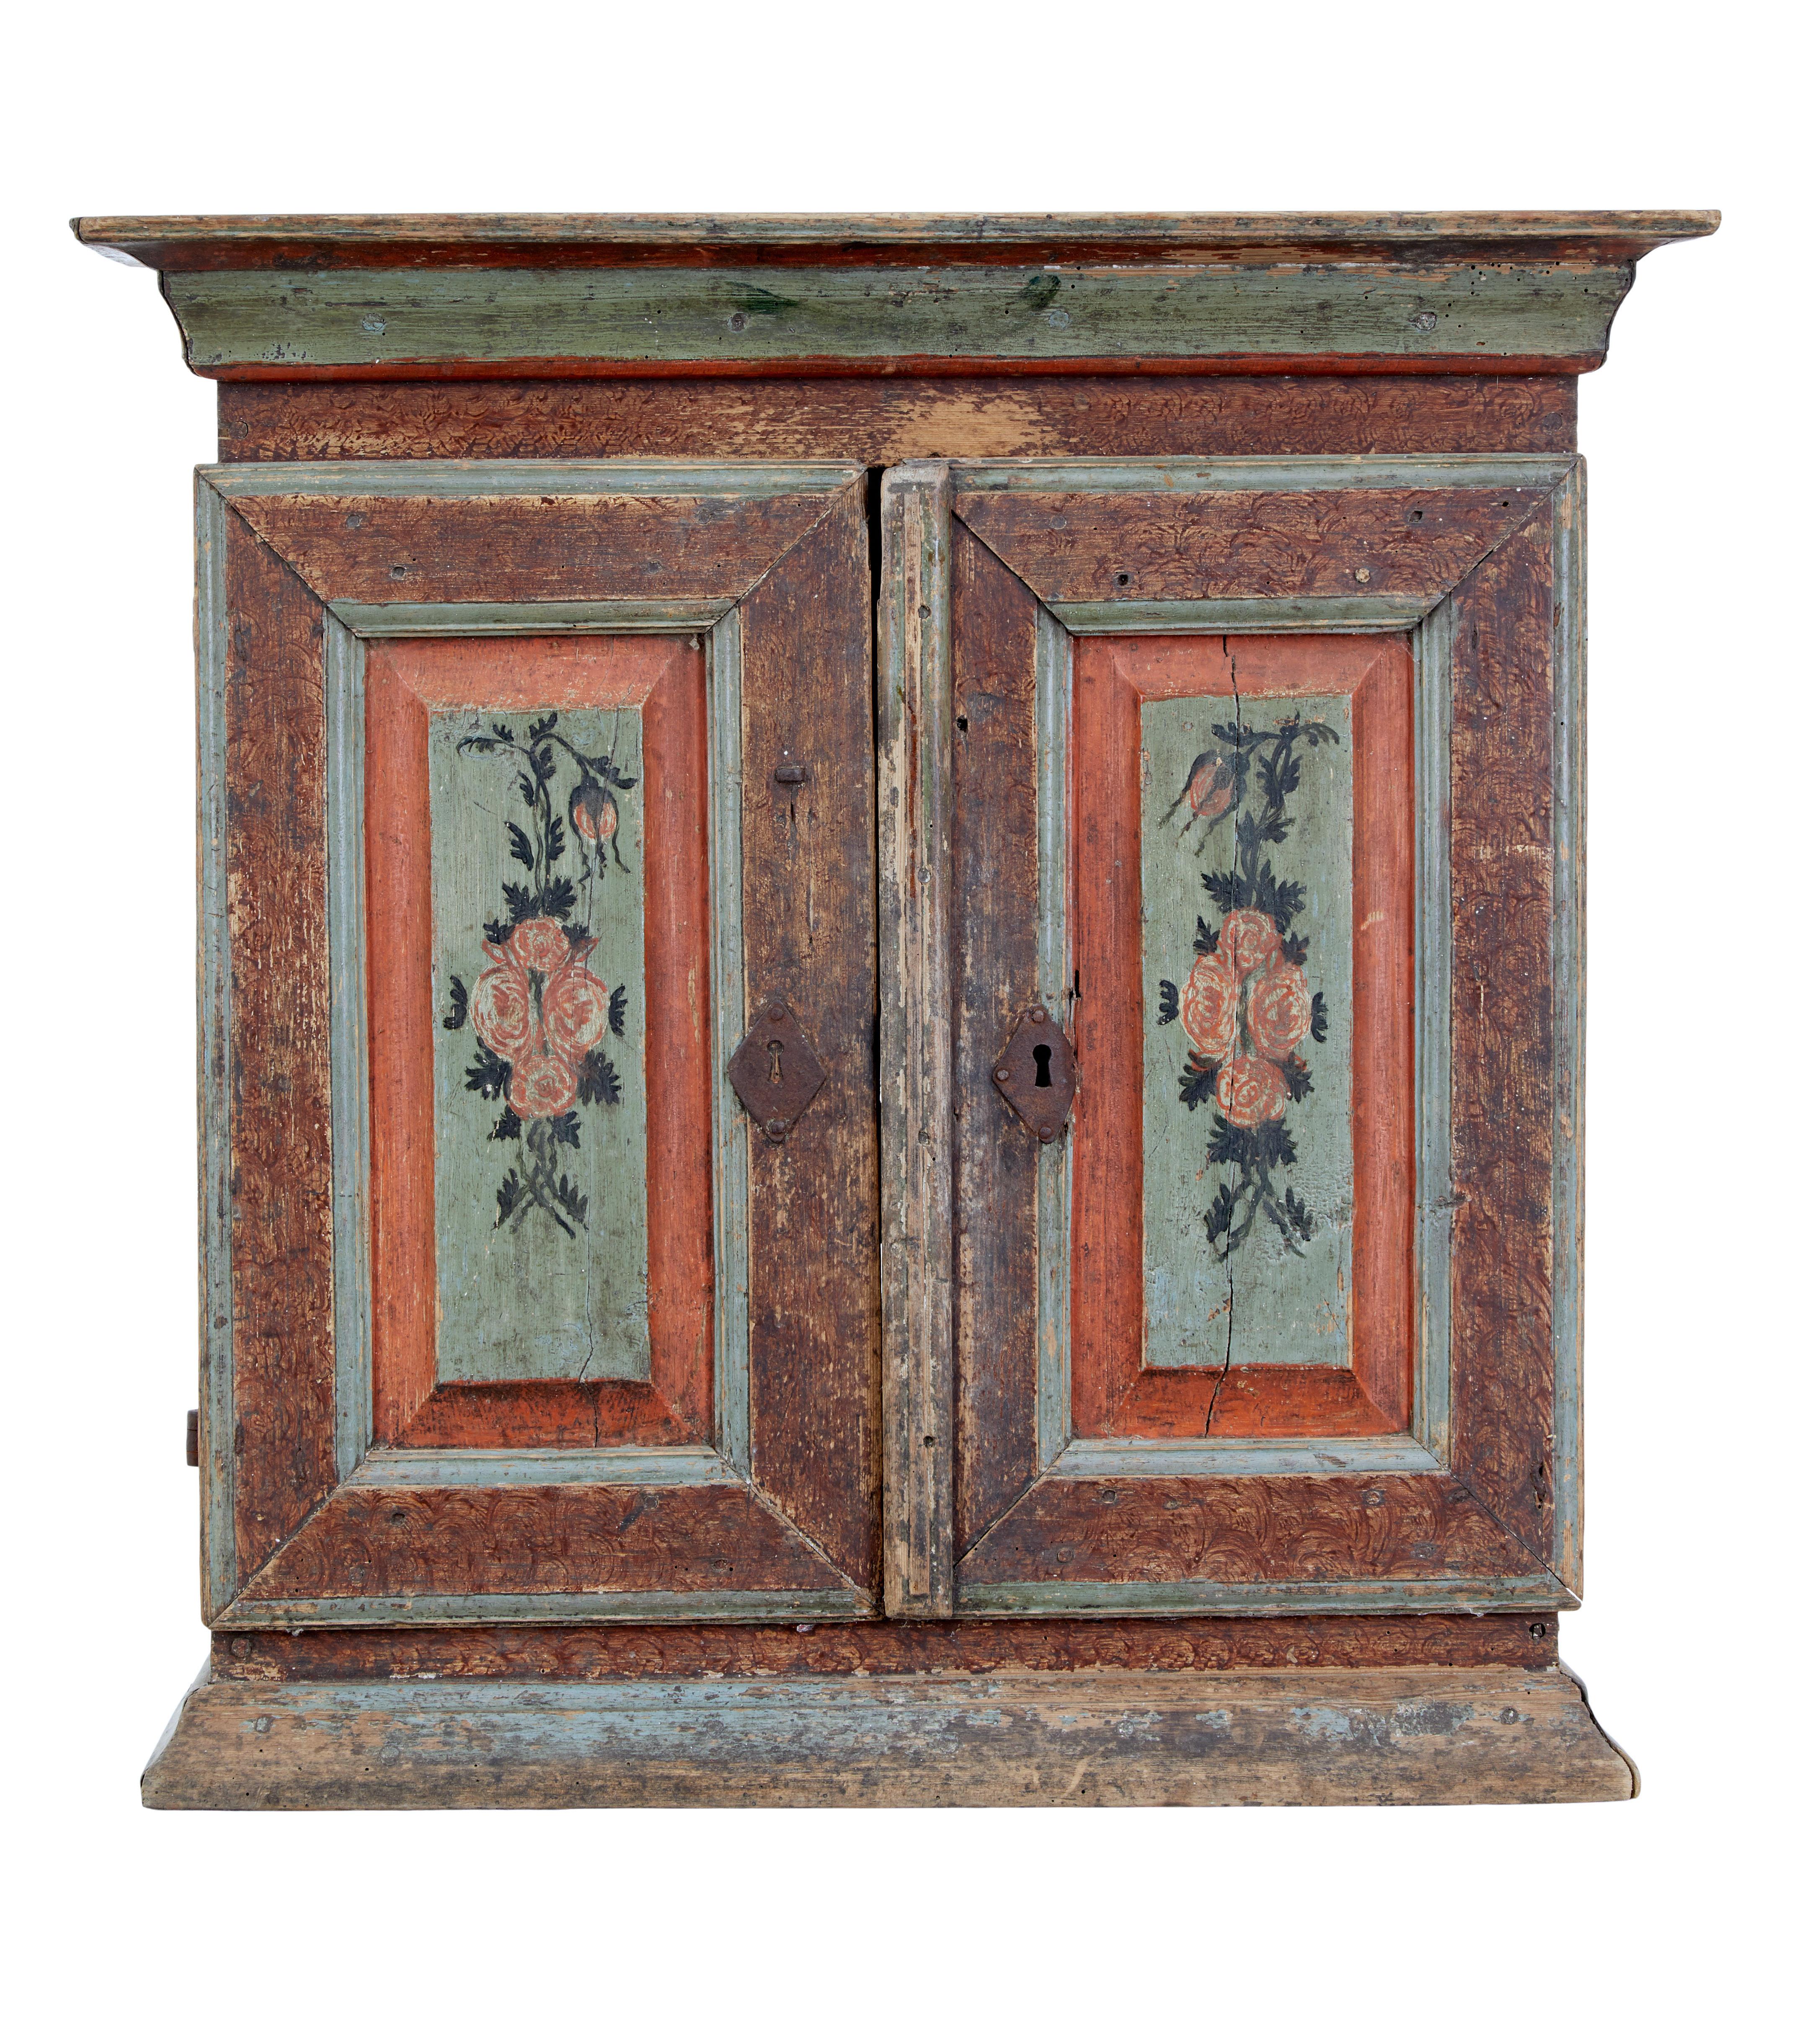 Early 19th century Swedish folk art painted cupboard circa 1820.

We are pleased to offer this Swedish traditional hand painted cupboard in original condition, which would of been hung or placed against a wall on a table top.

Original green and